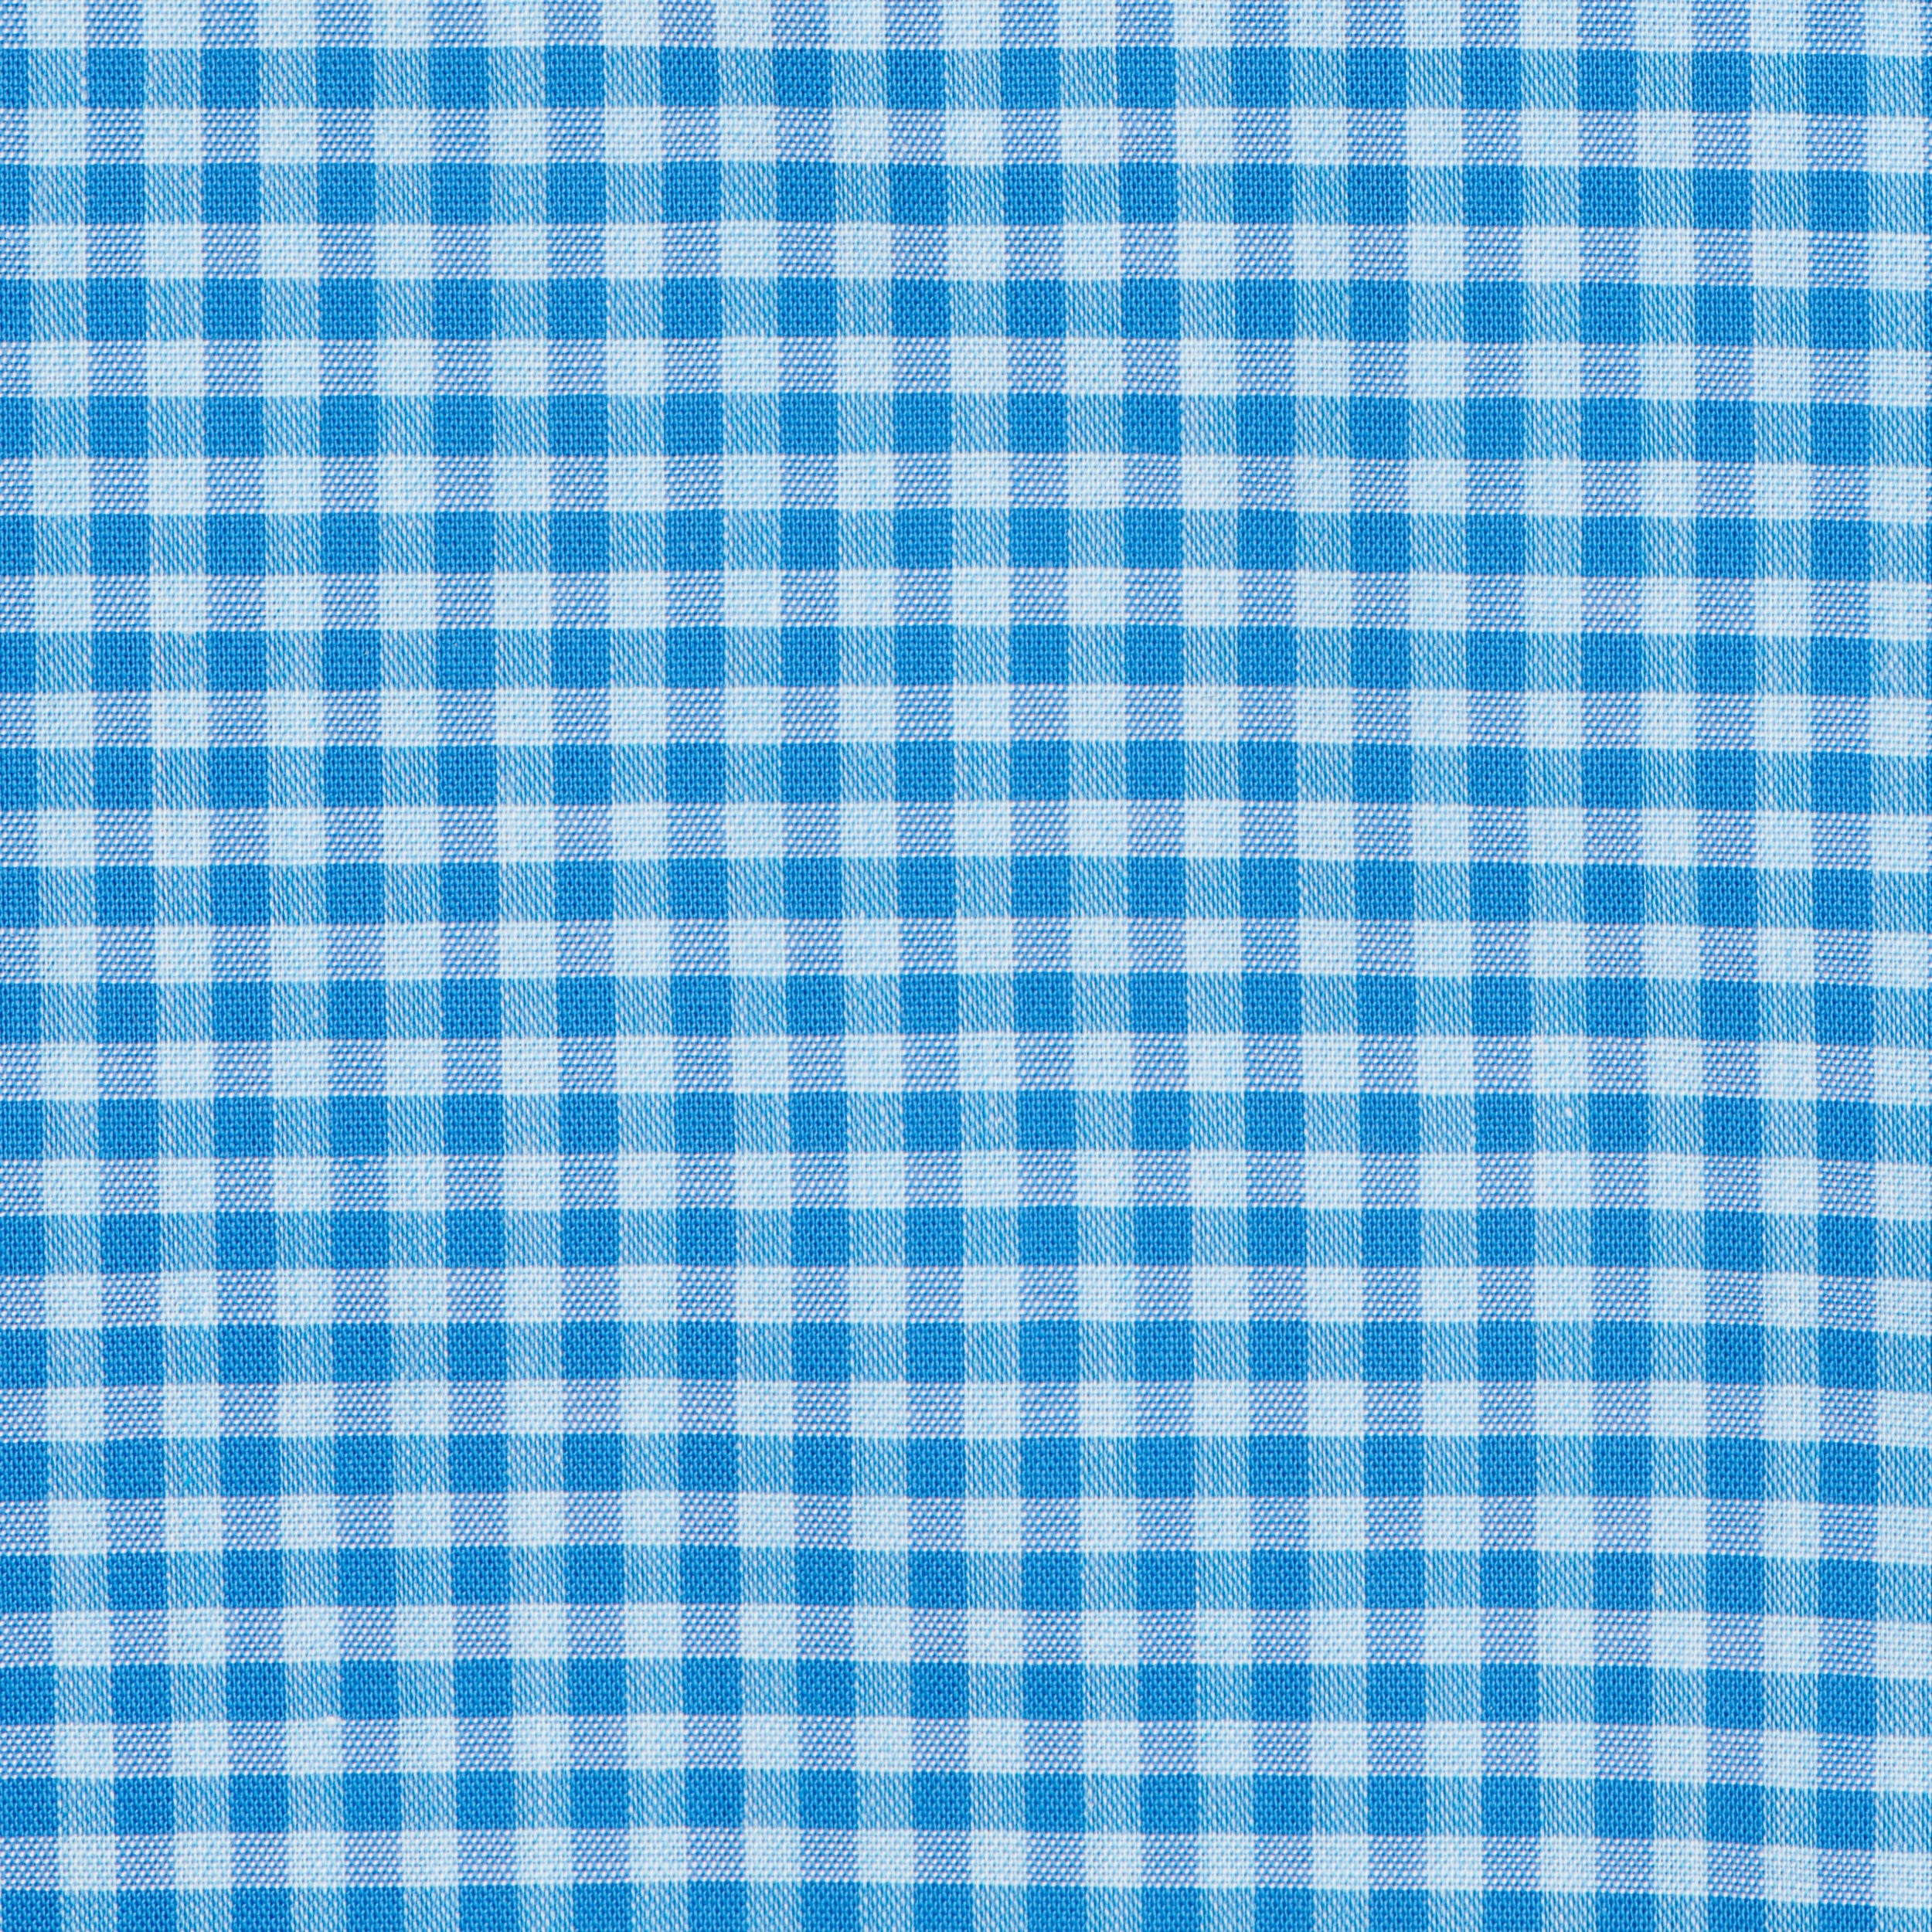 125 SC - Turquoise Filled Gingham Check Spread Collar